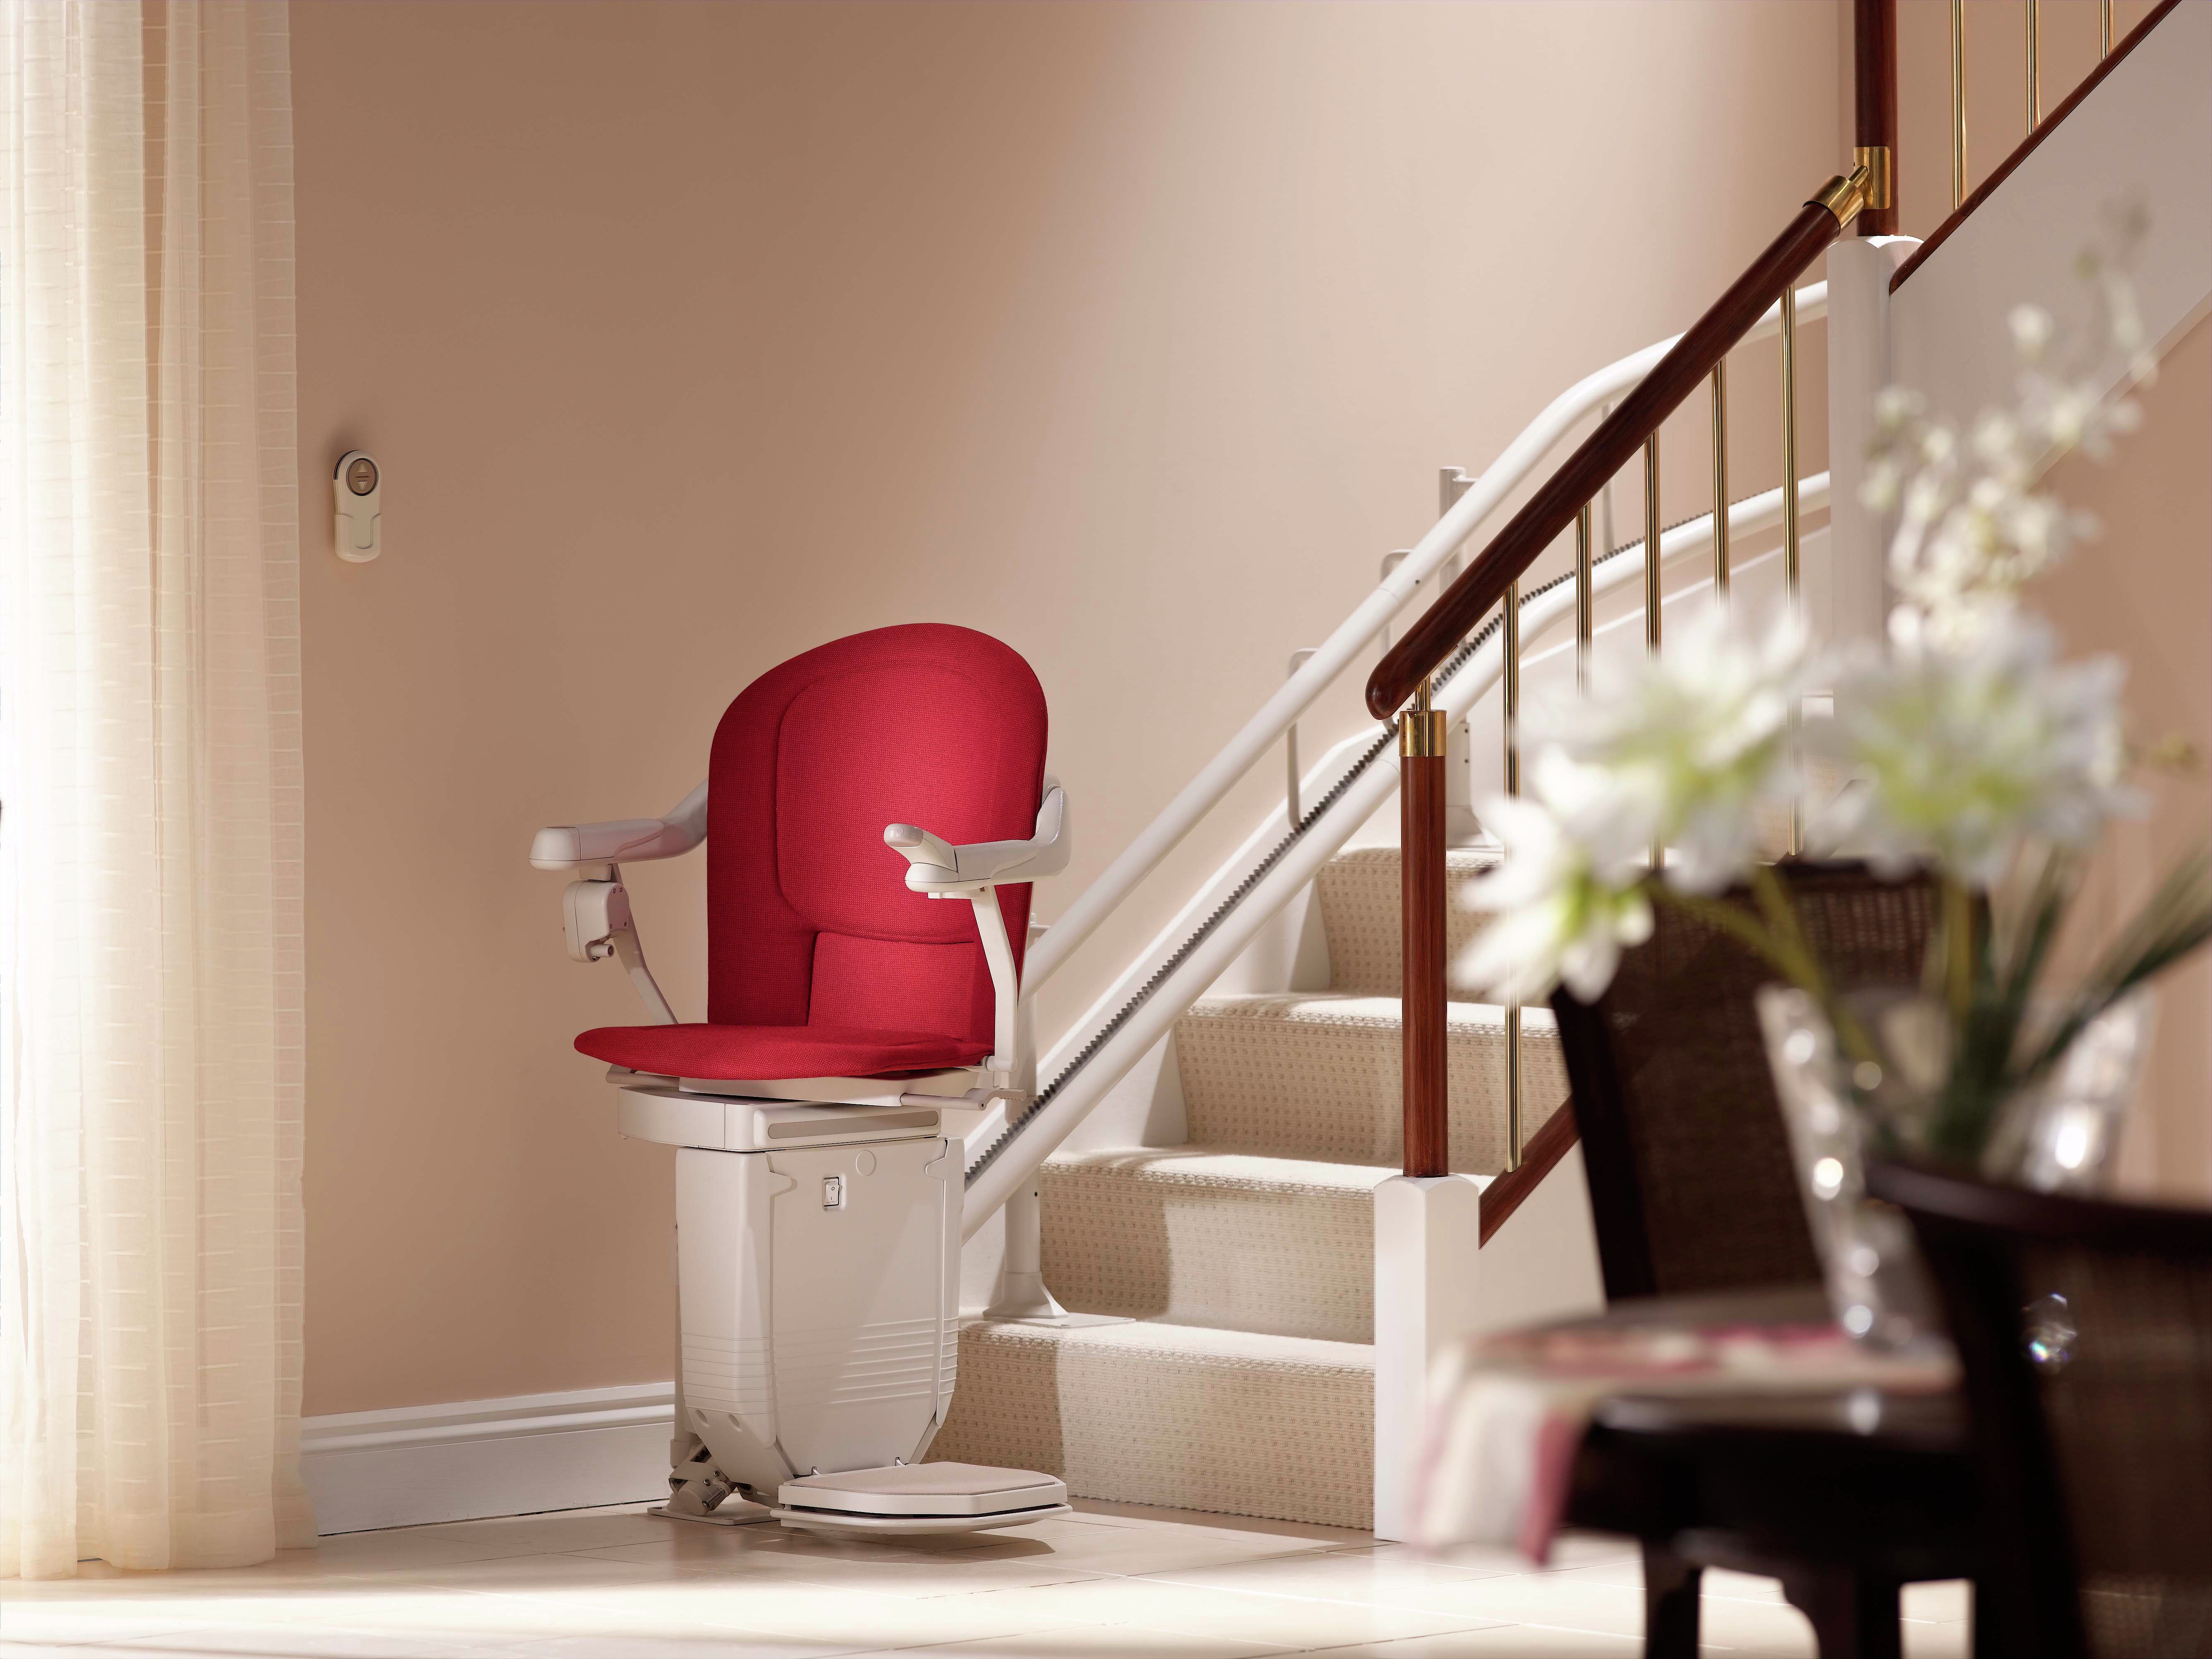 Stannah, at the forefront of the stairlifts, with over 40 years of experience.